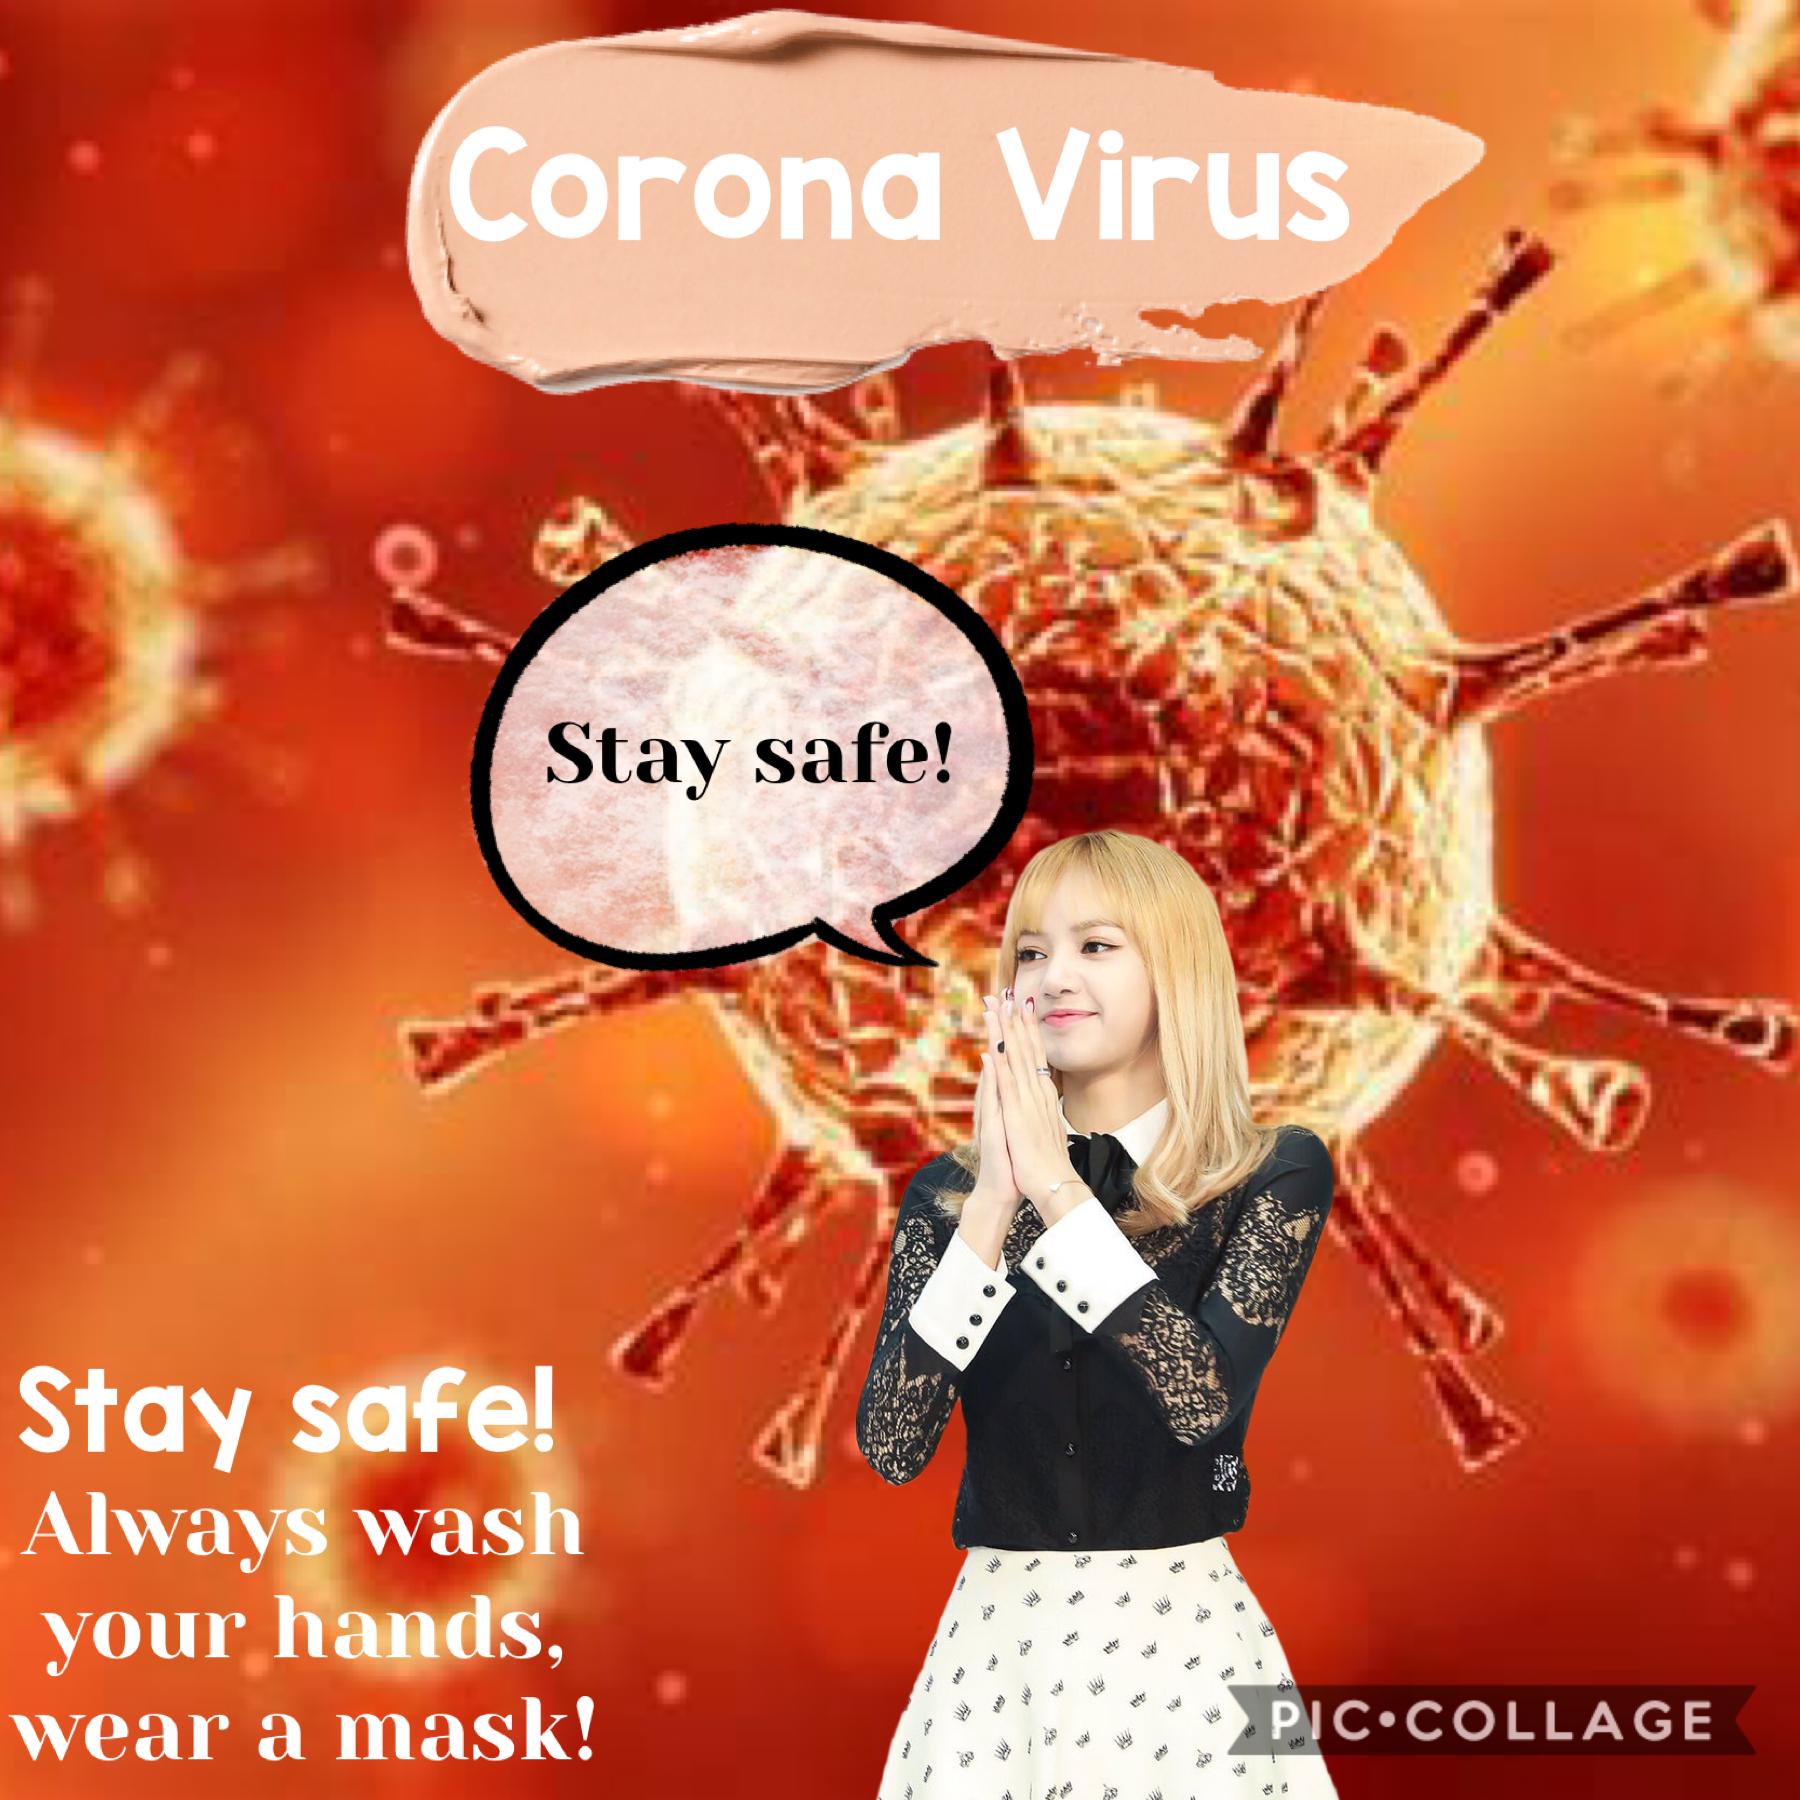 🦠TAP🦠 

PLS PLS PLS 
Be careful! 
And stay safe! 
Sry this is not a good collage...